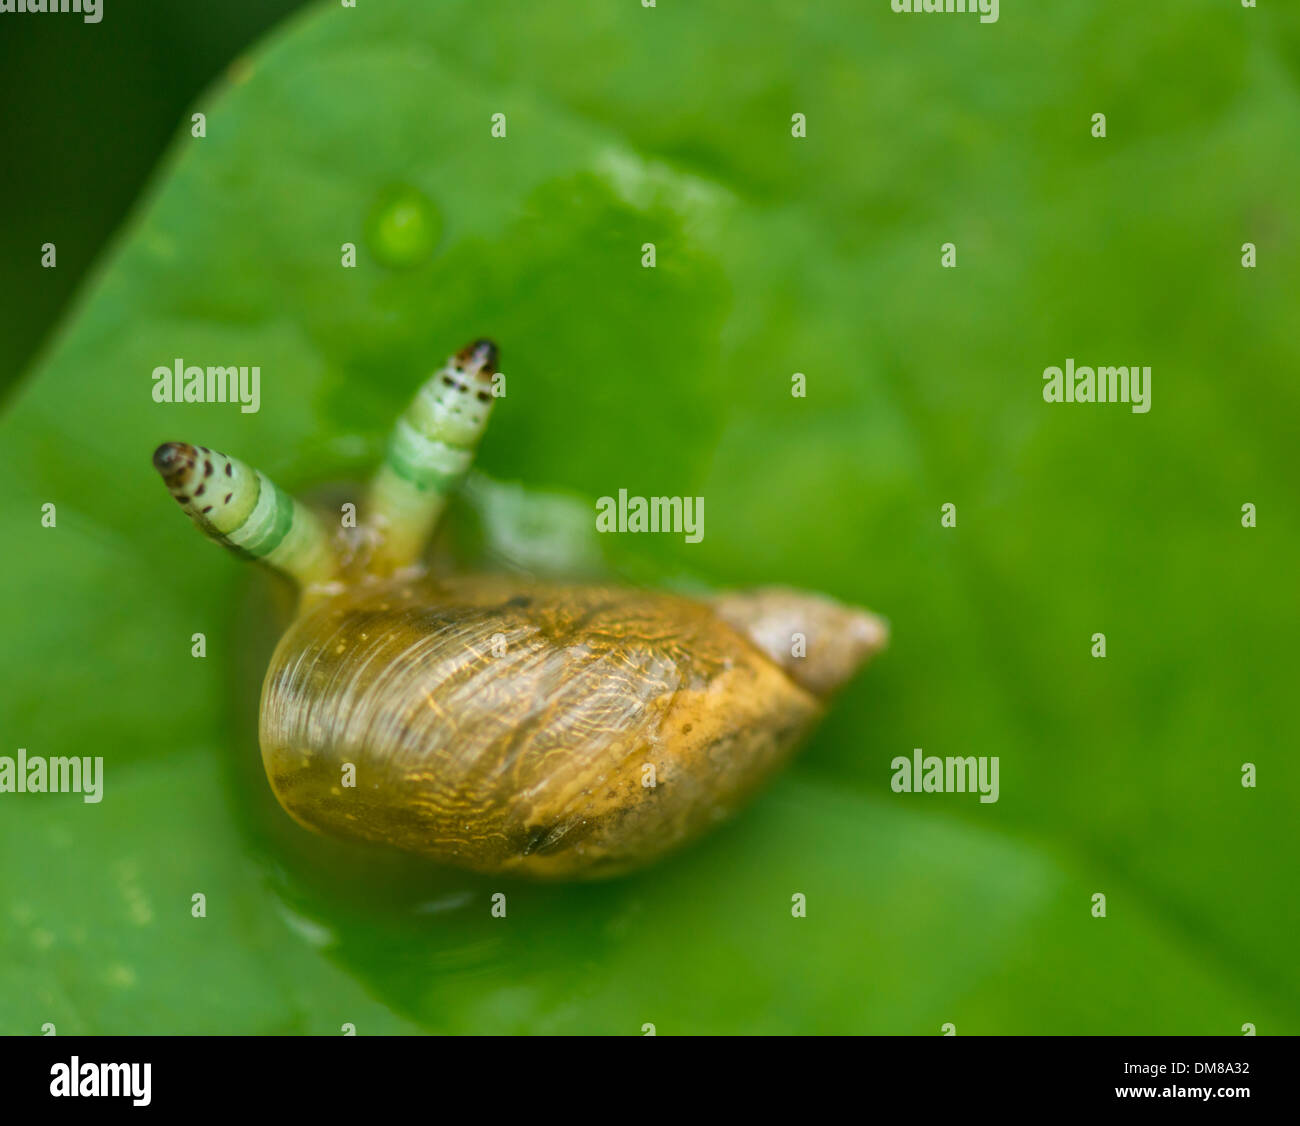 Snail infected with a parasite in its tentacles Stock Photo